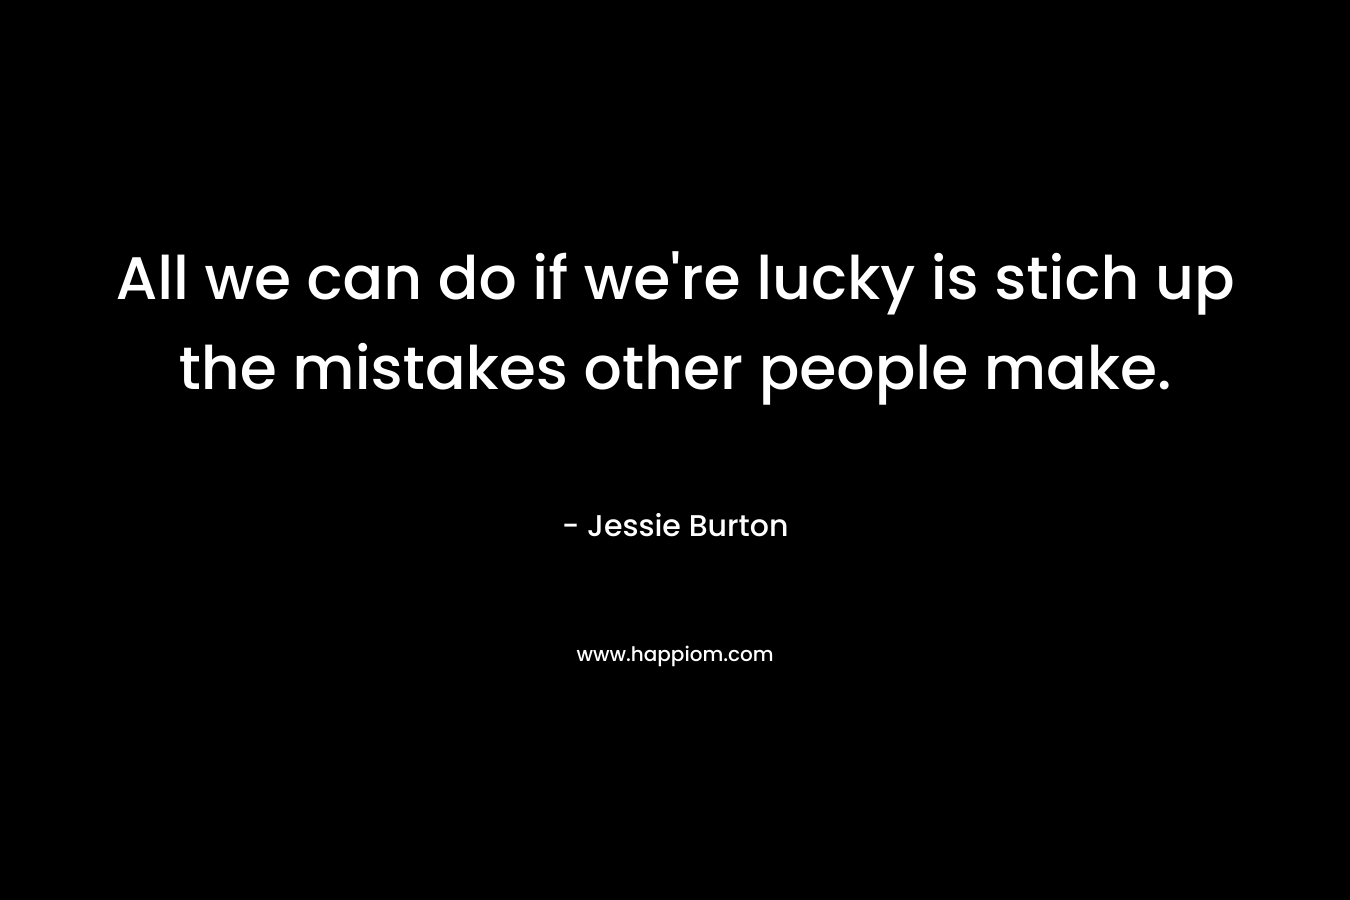 All we can do if we’re lucky is stich up the mistakes other people make. – Jessie Burton